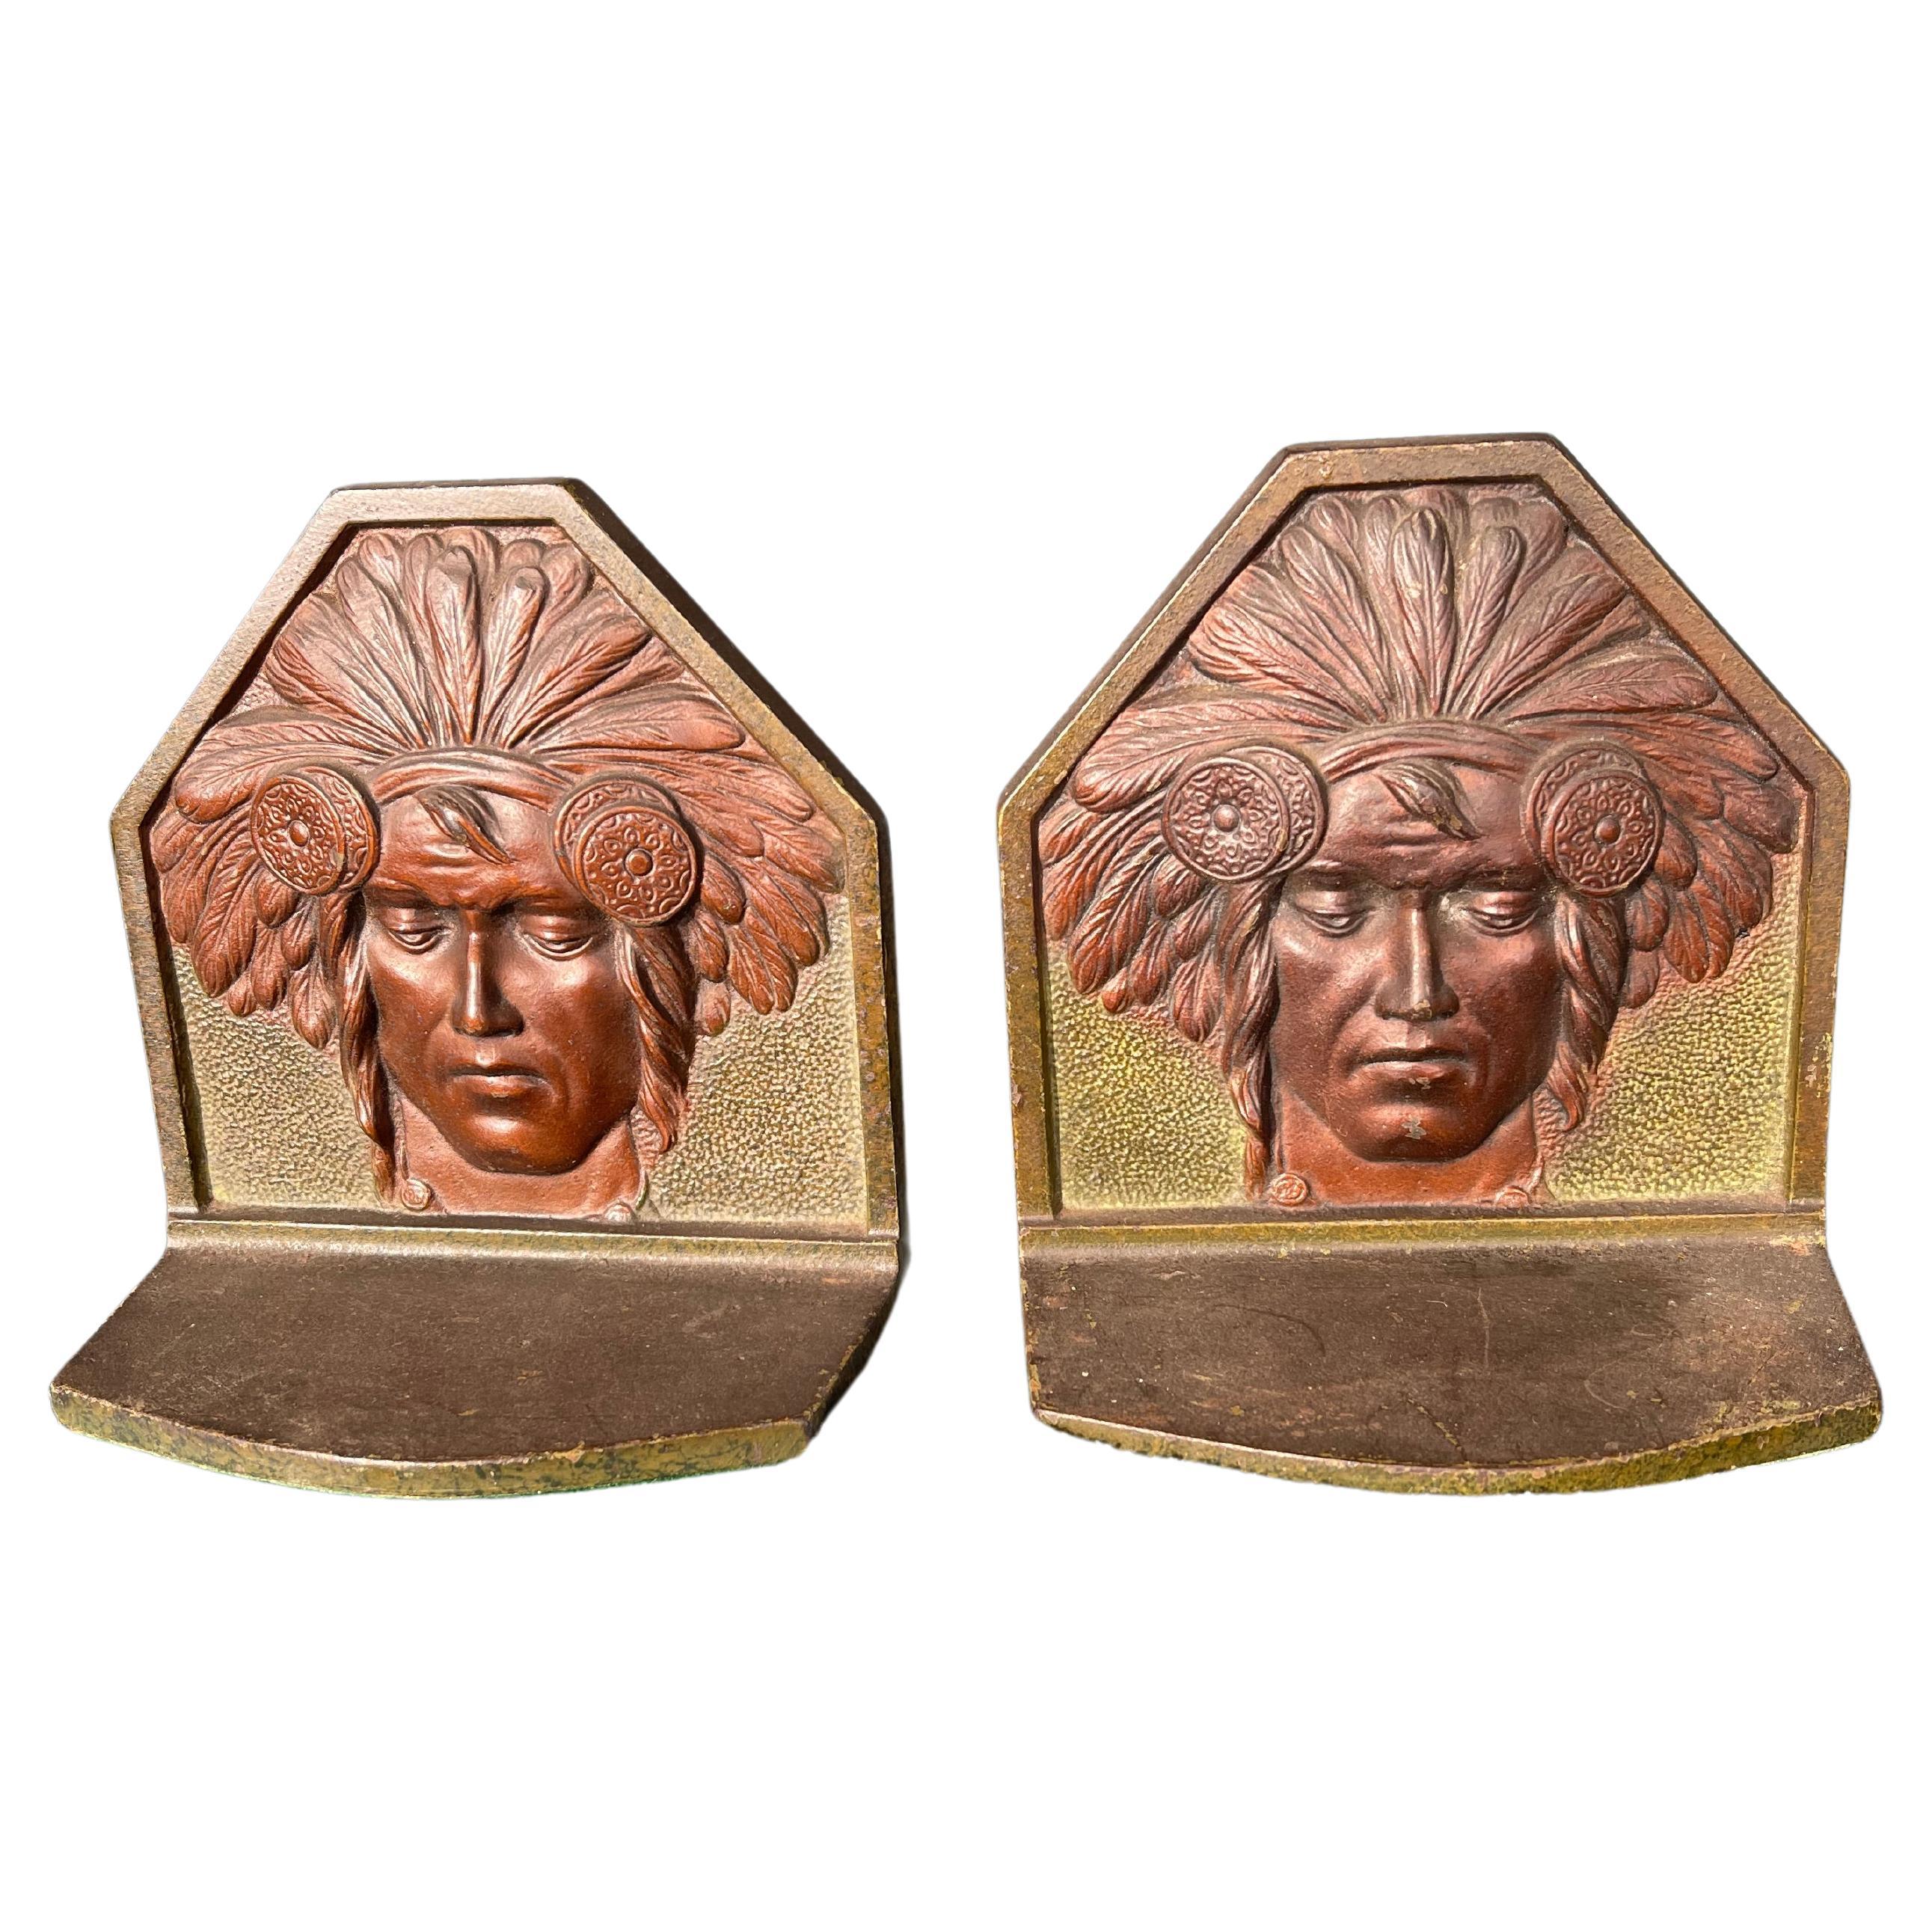 Pair of Cast Iron Bookends w/ Indians, by Judd Co. ca. 1910